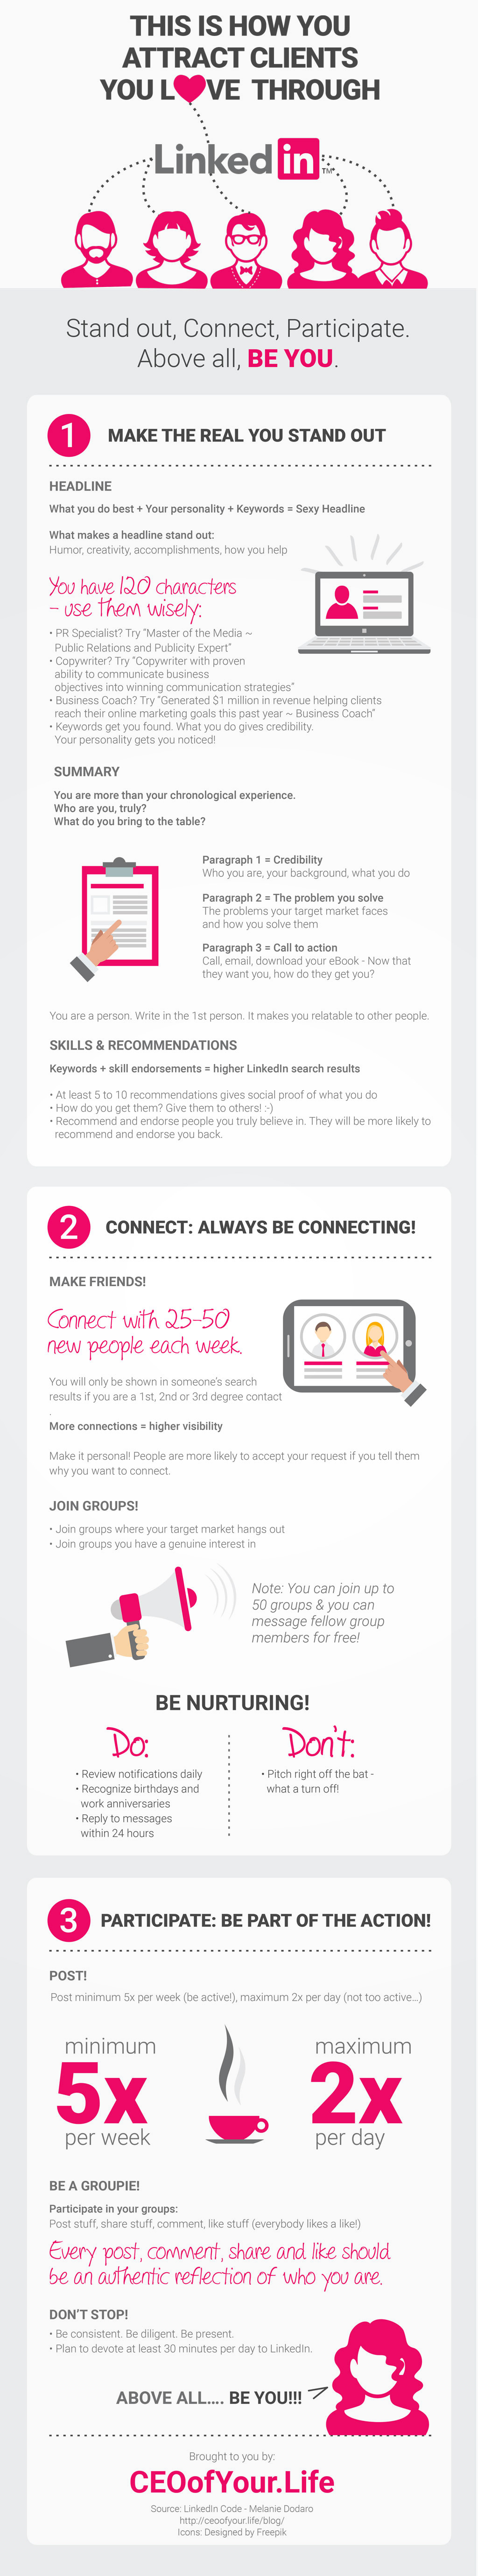 wersm-be-yourself-linkedin-infographic